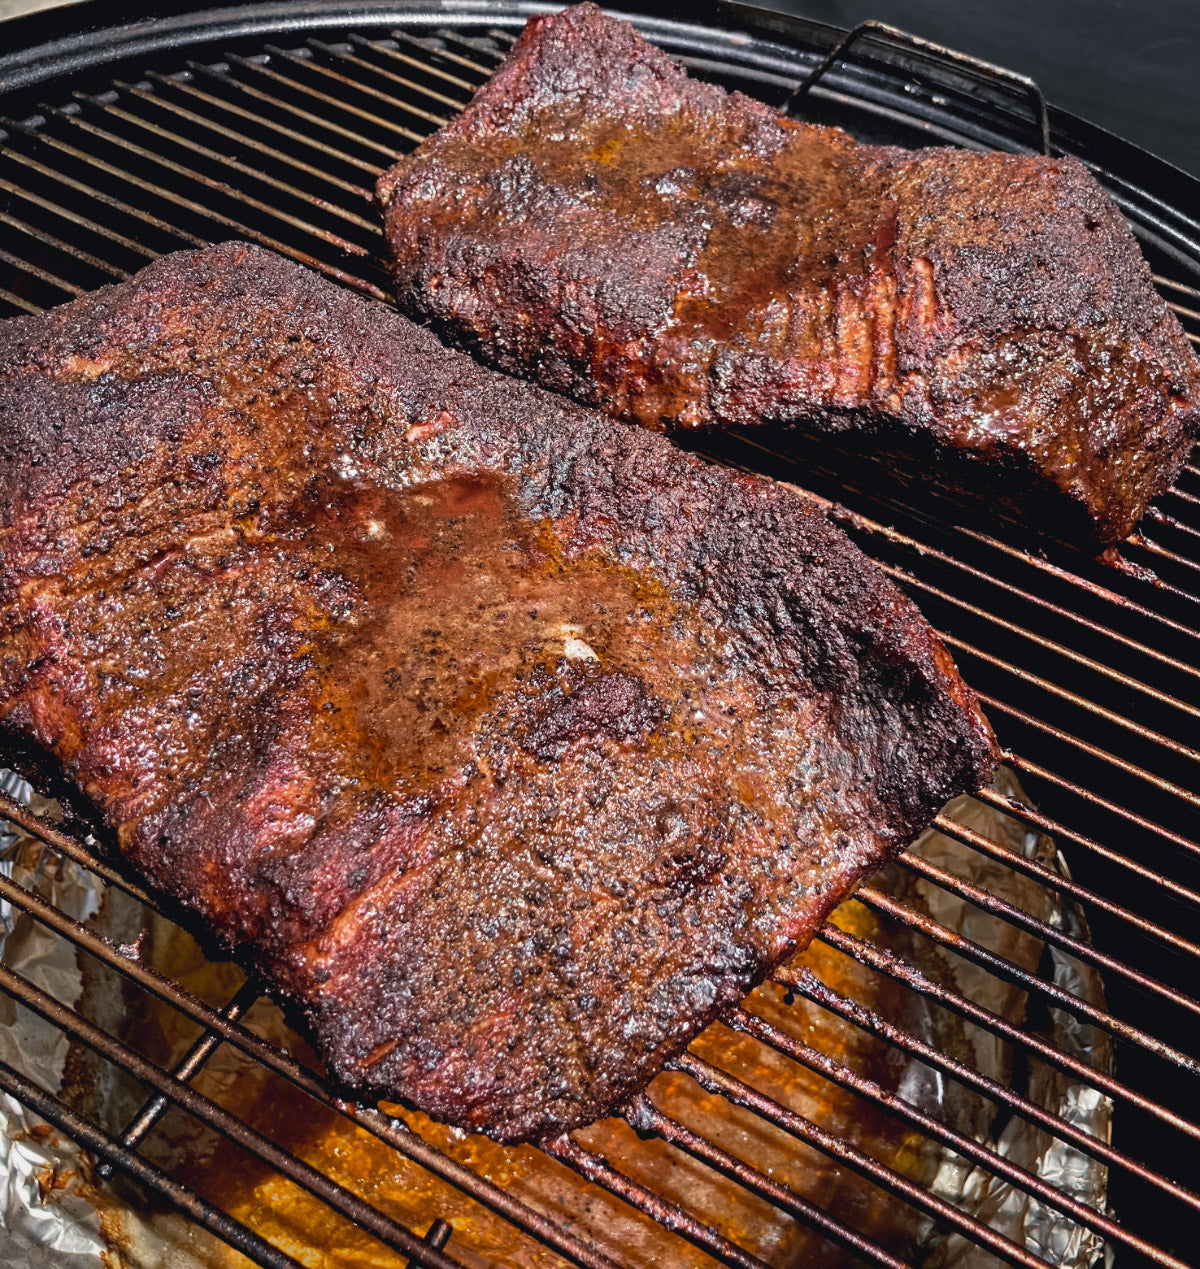 Photo of fully cooked briskets on a smoker